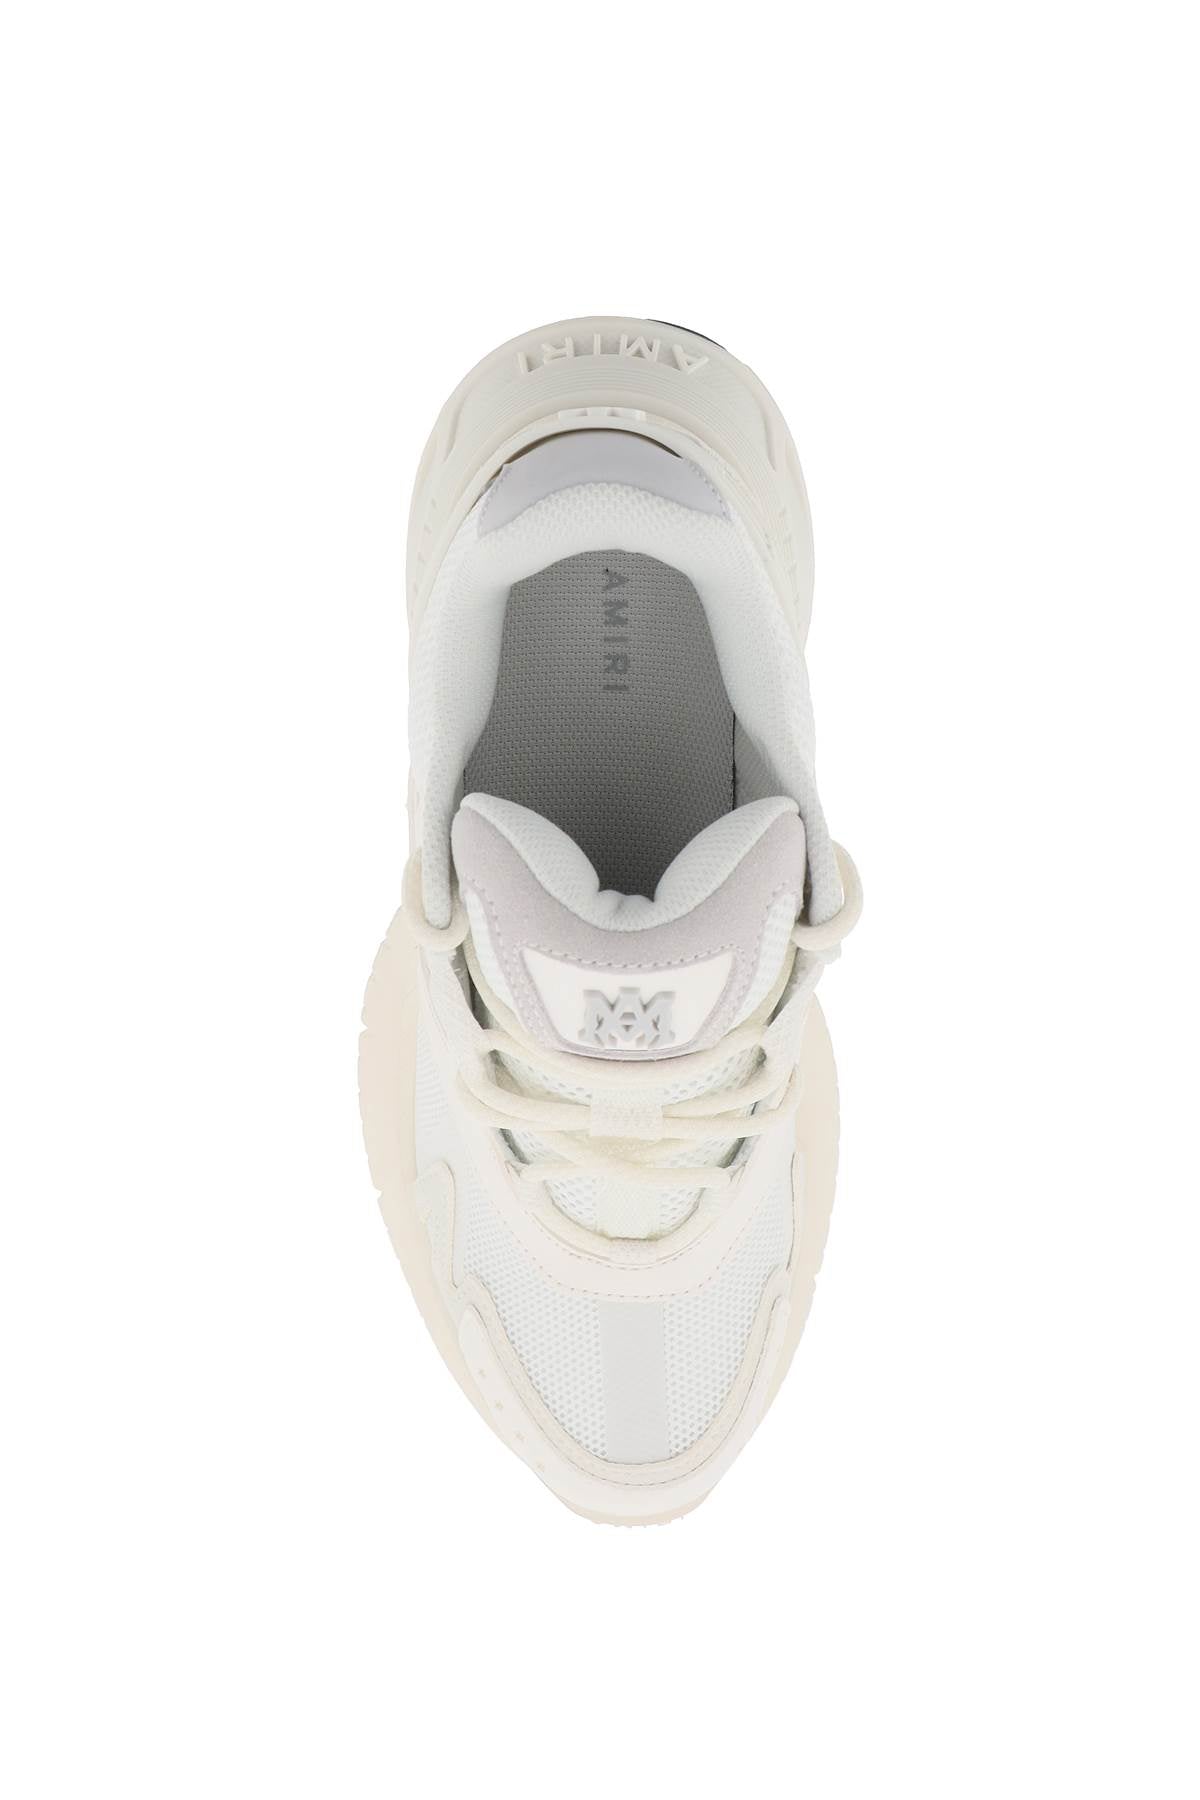 Amiri mesh and leather ma sneakers in 9-1